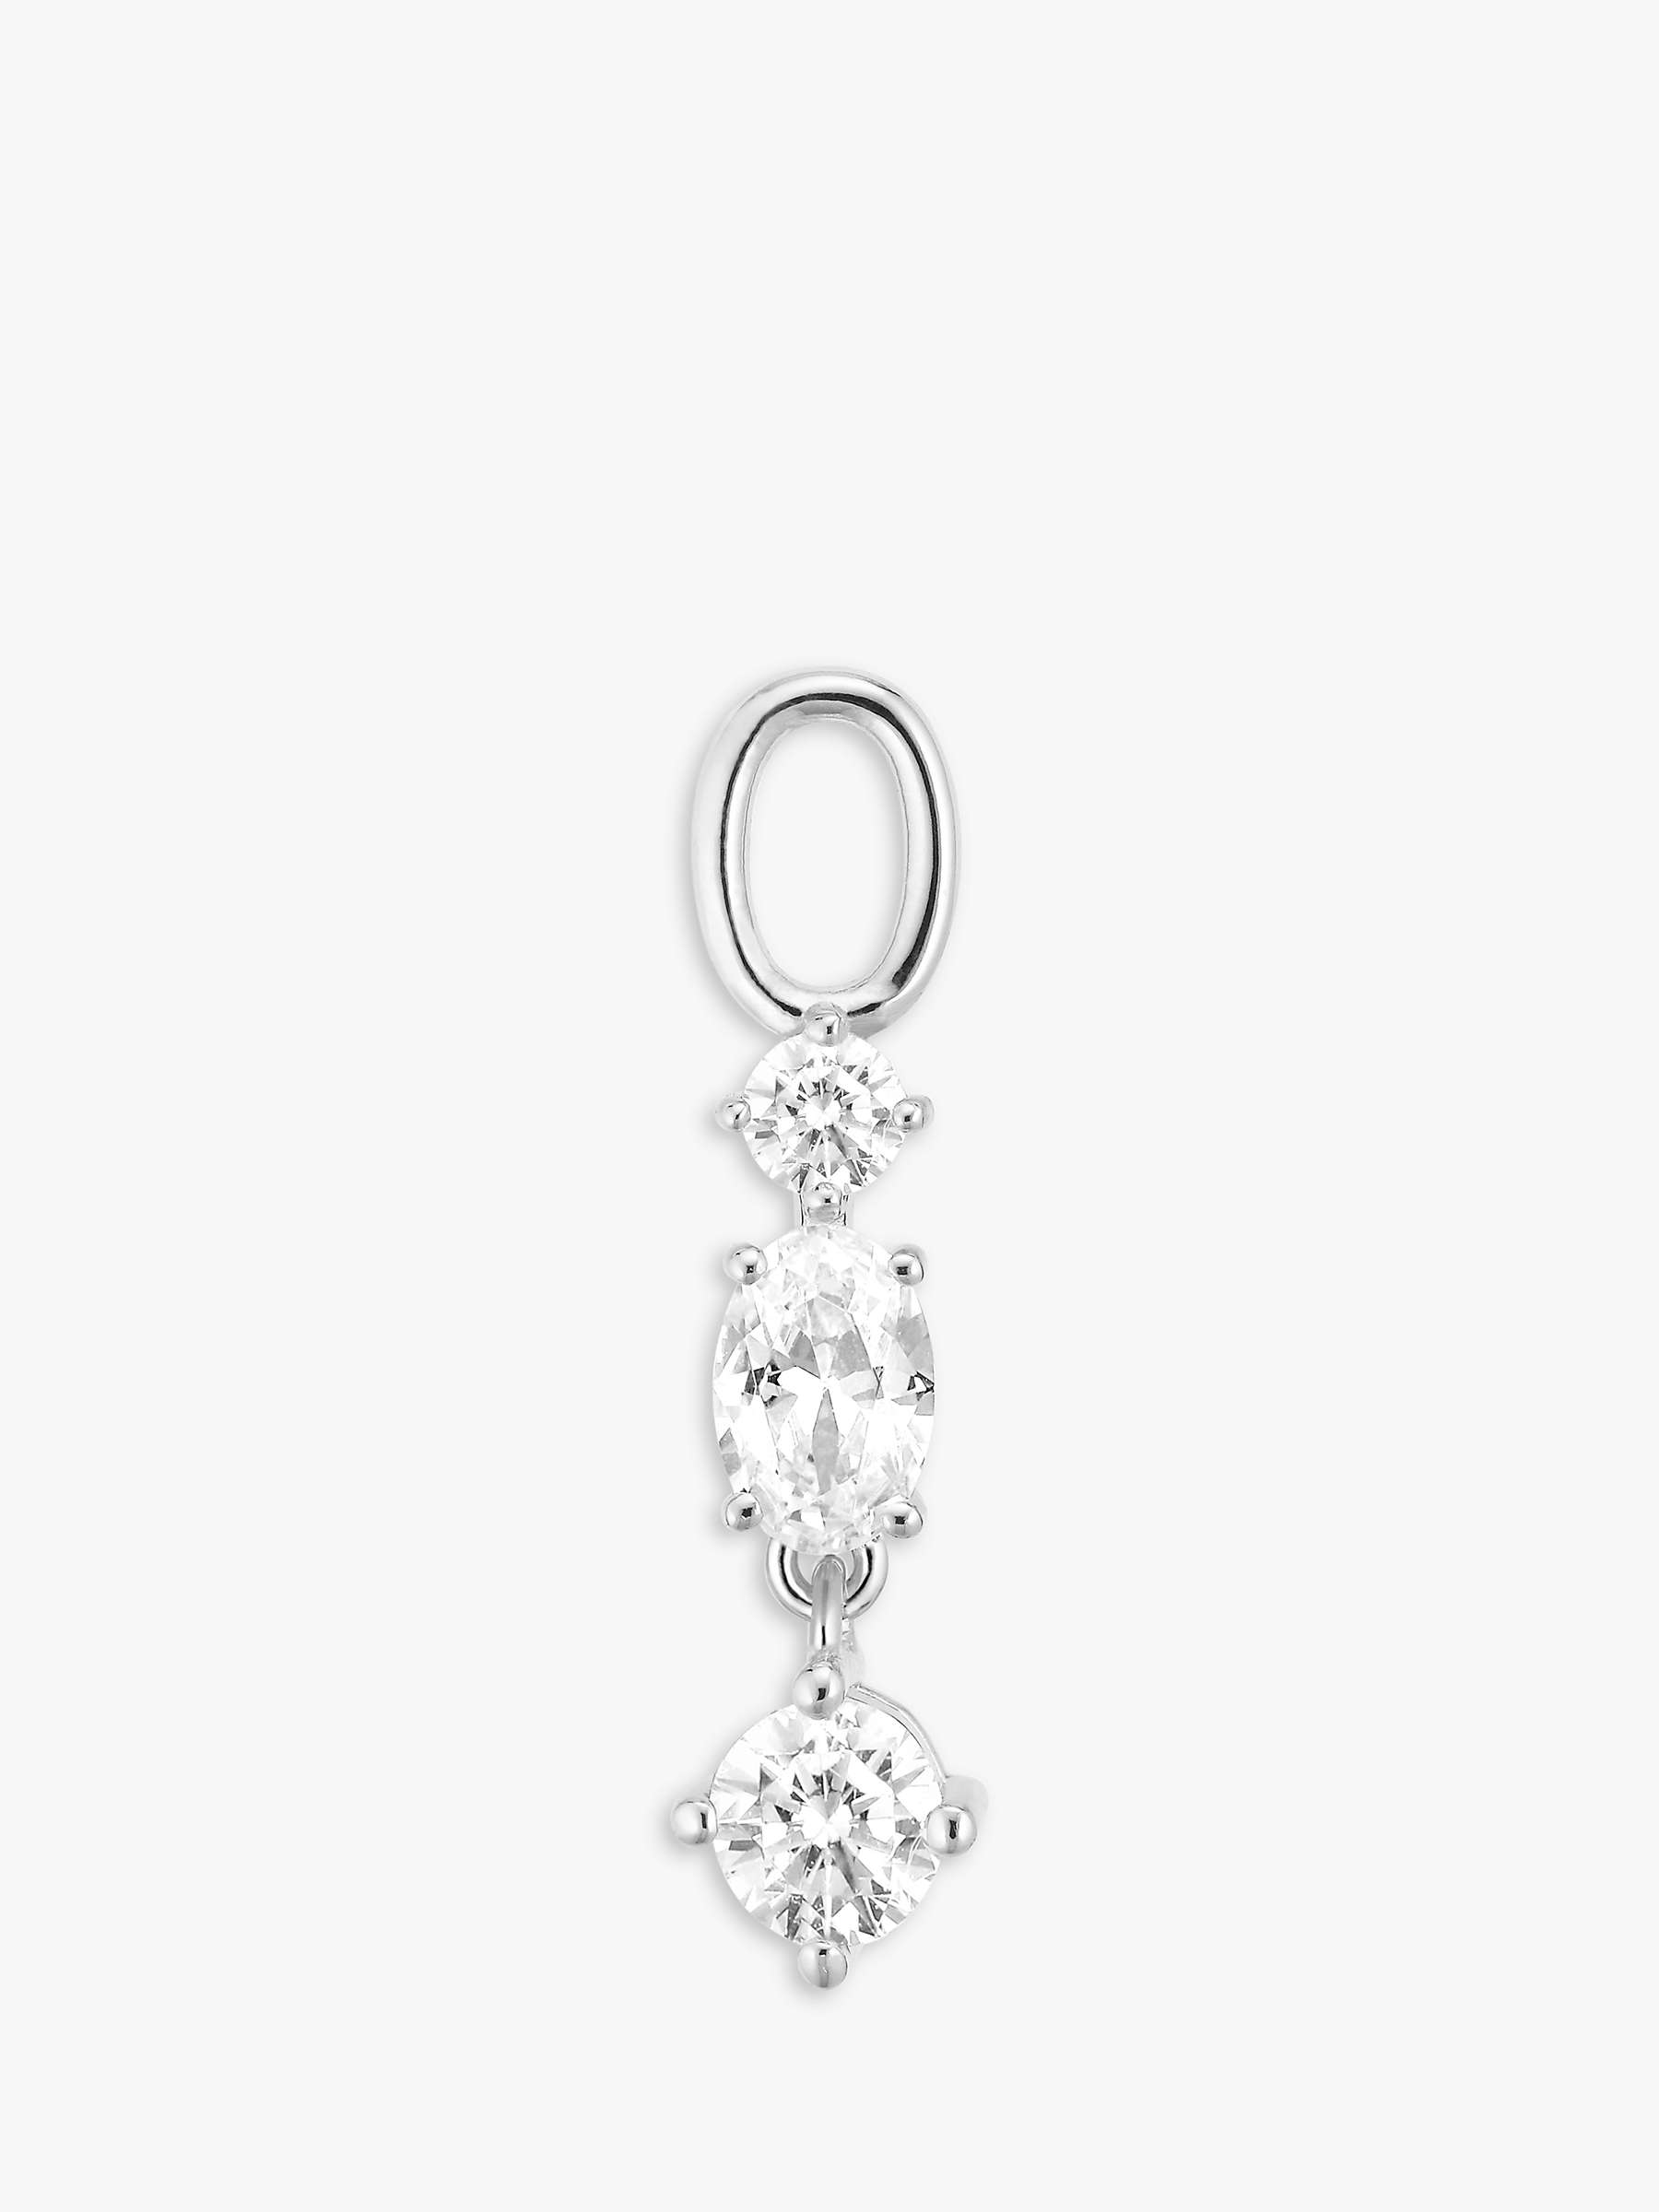 Buy Sif Jakobs Jewellery Sterling Silver Cubic Zirconia Earring Charm, Silver Online at johnlewis.com